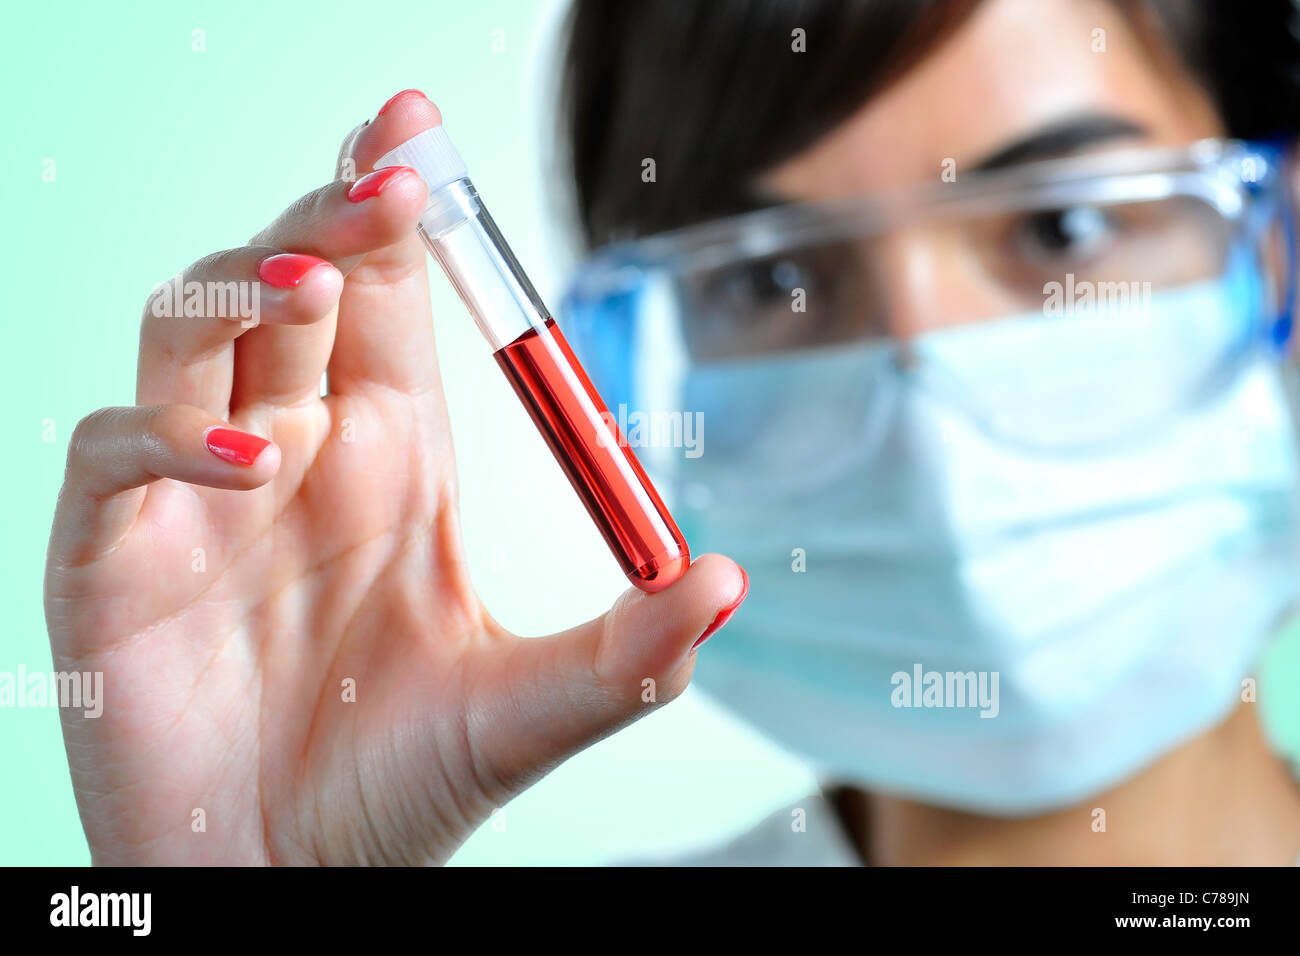 Women looking at a blood sample Stock Photo